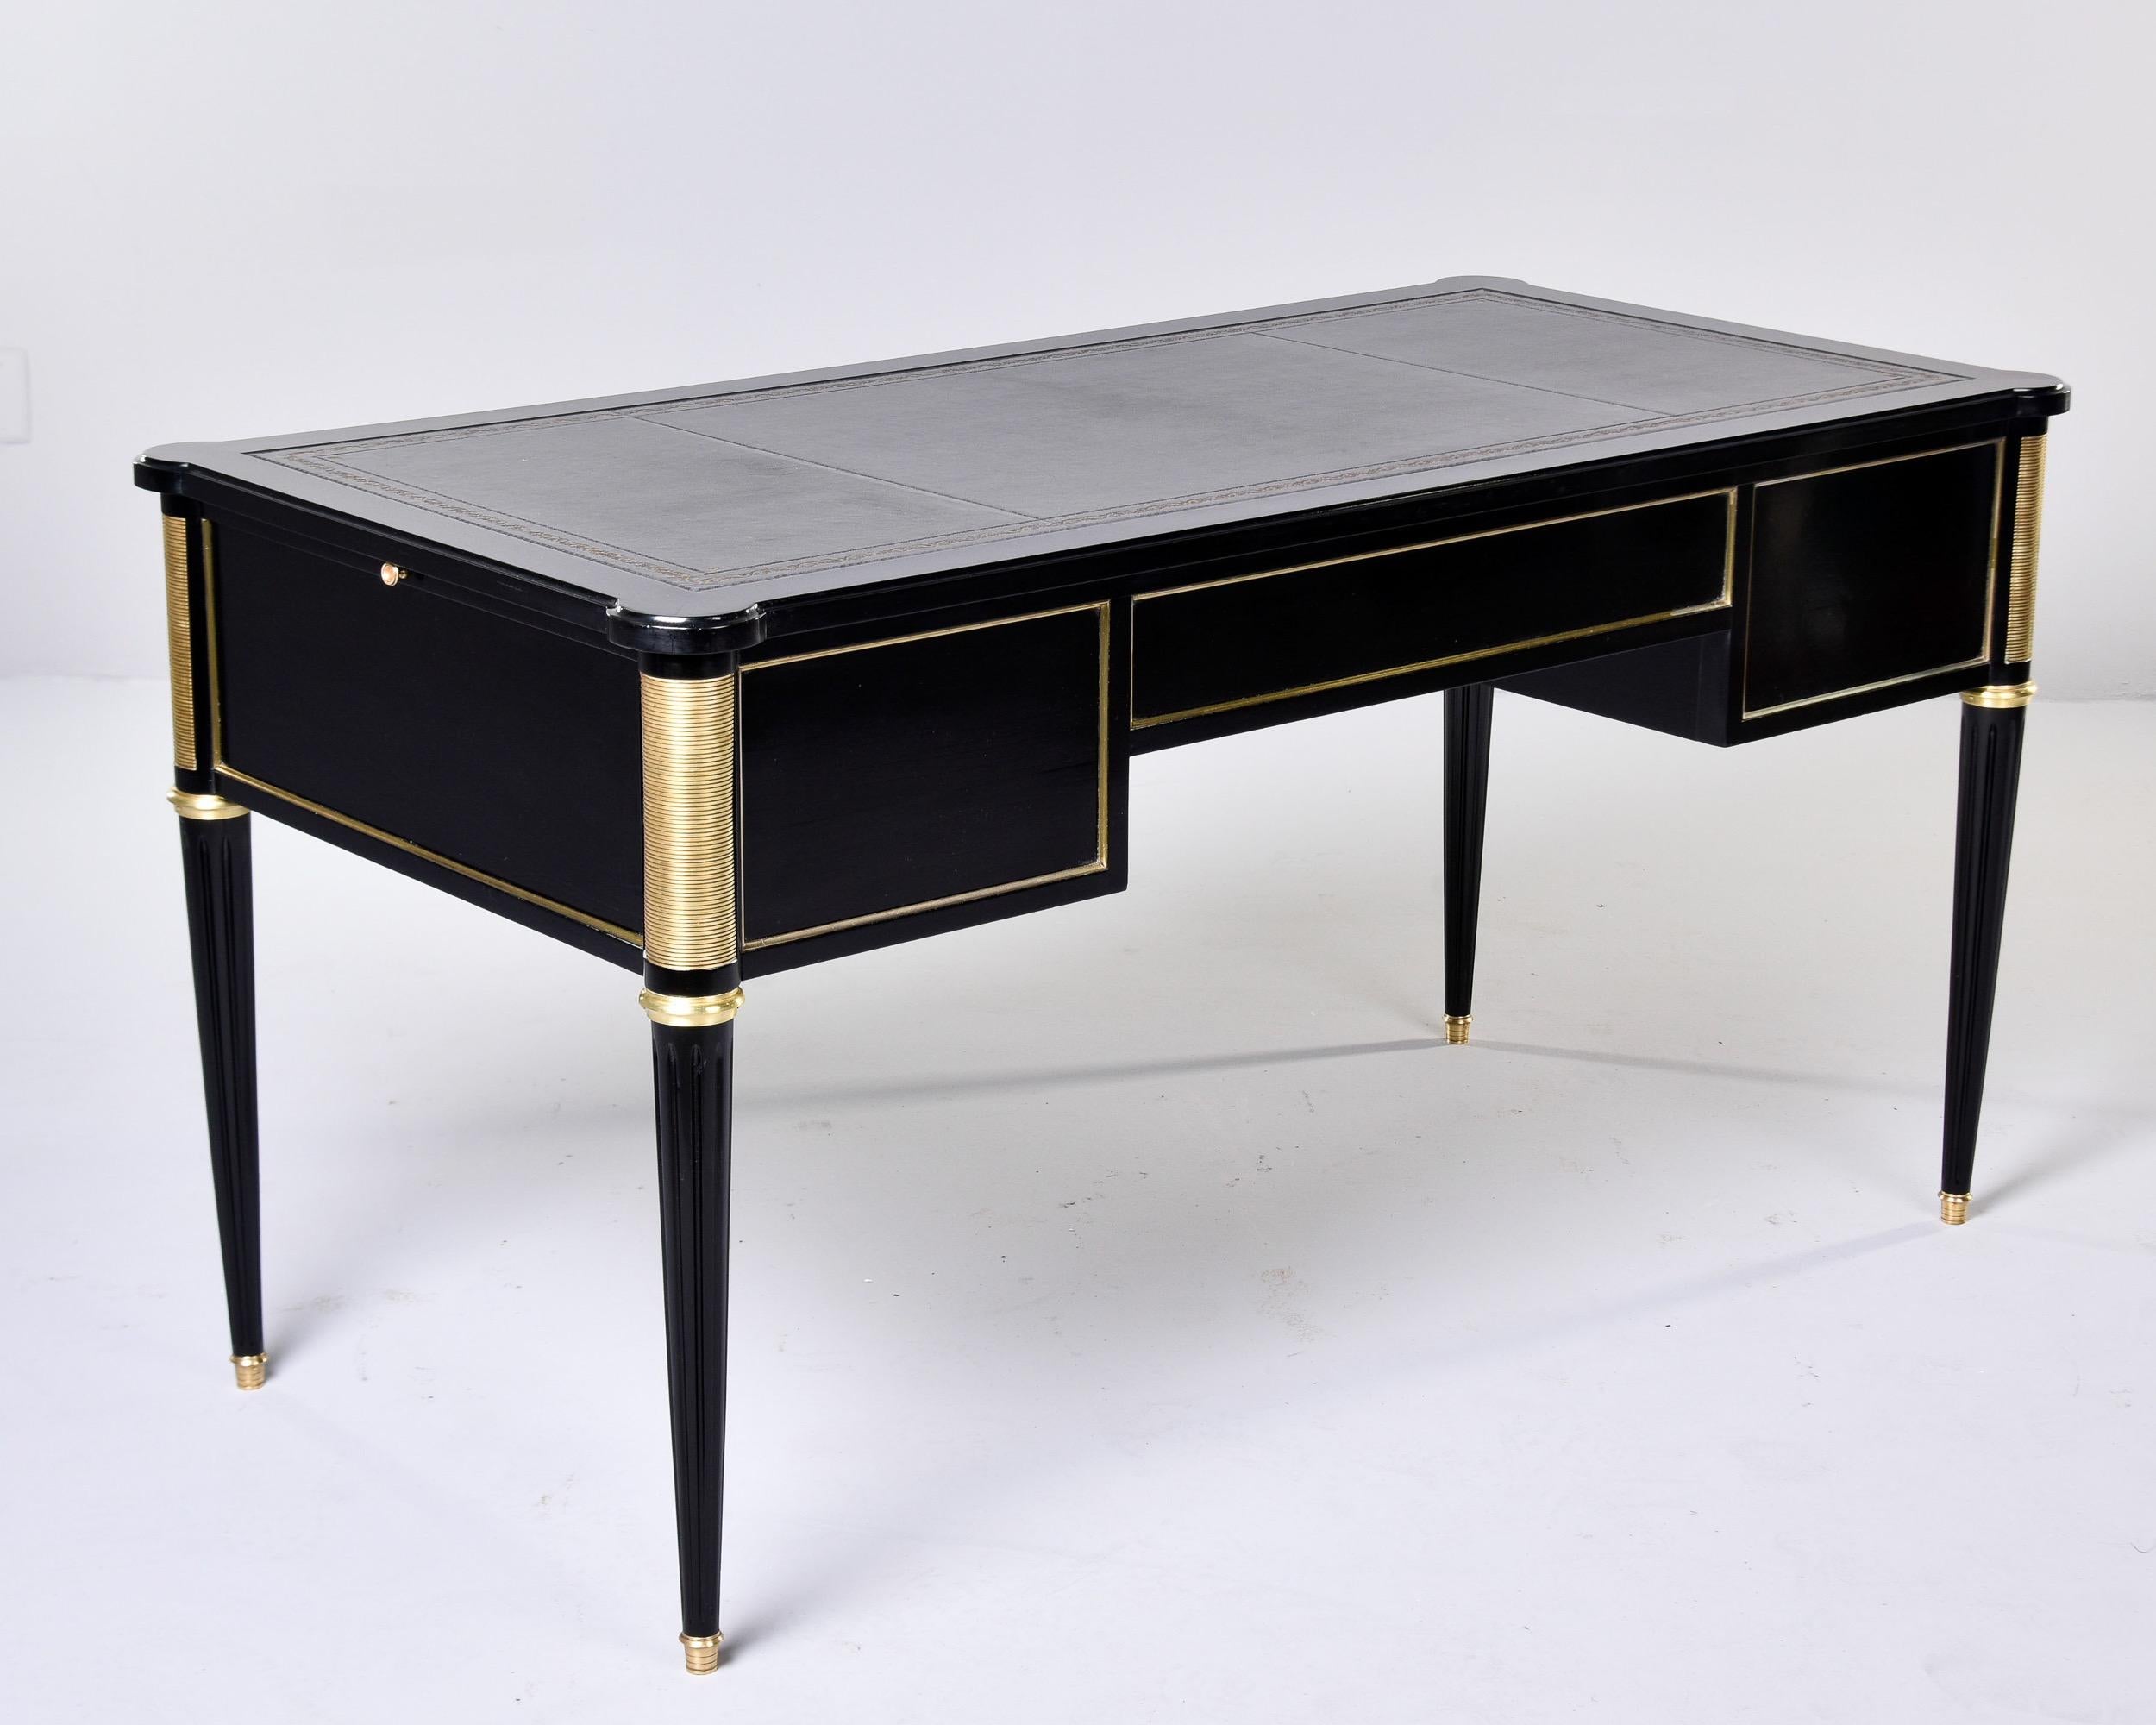 19th C Louis XVI Style Ebonised Desk with Brass Mounts and New Leather Top  For Sale 4